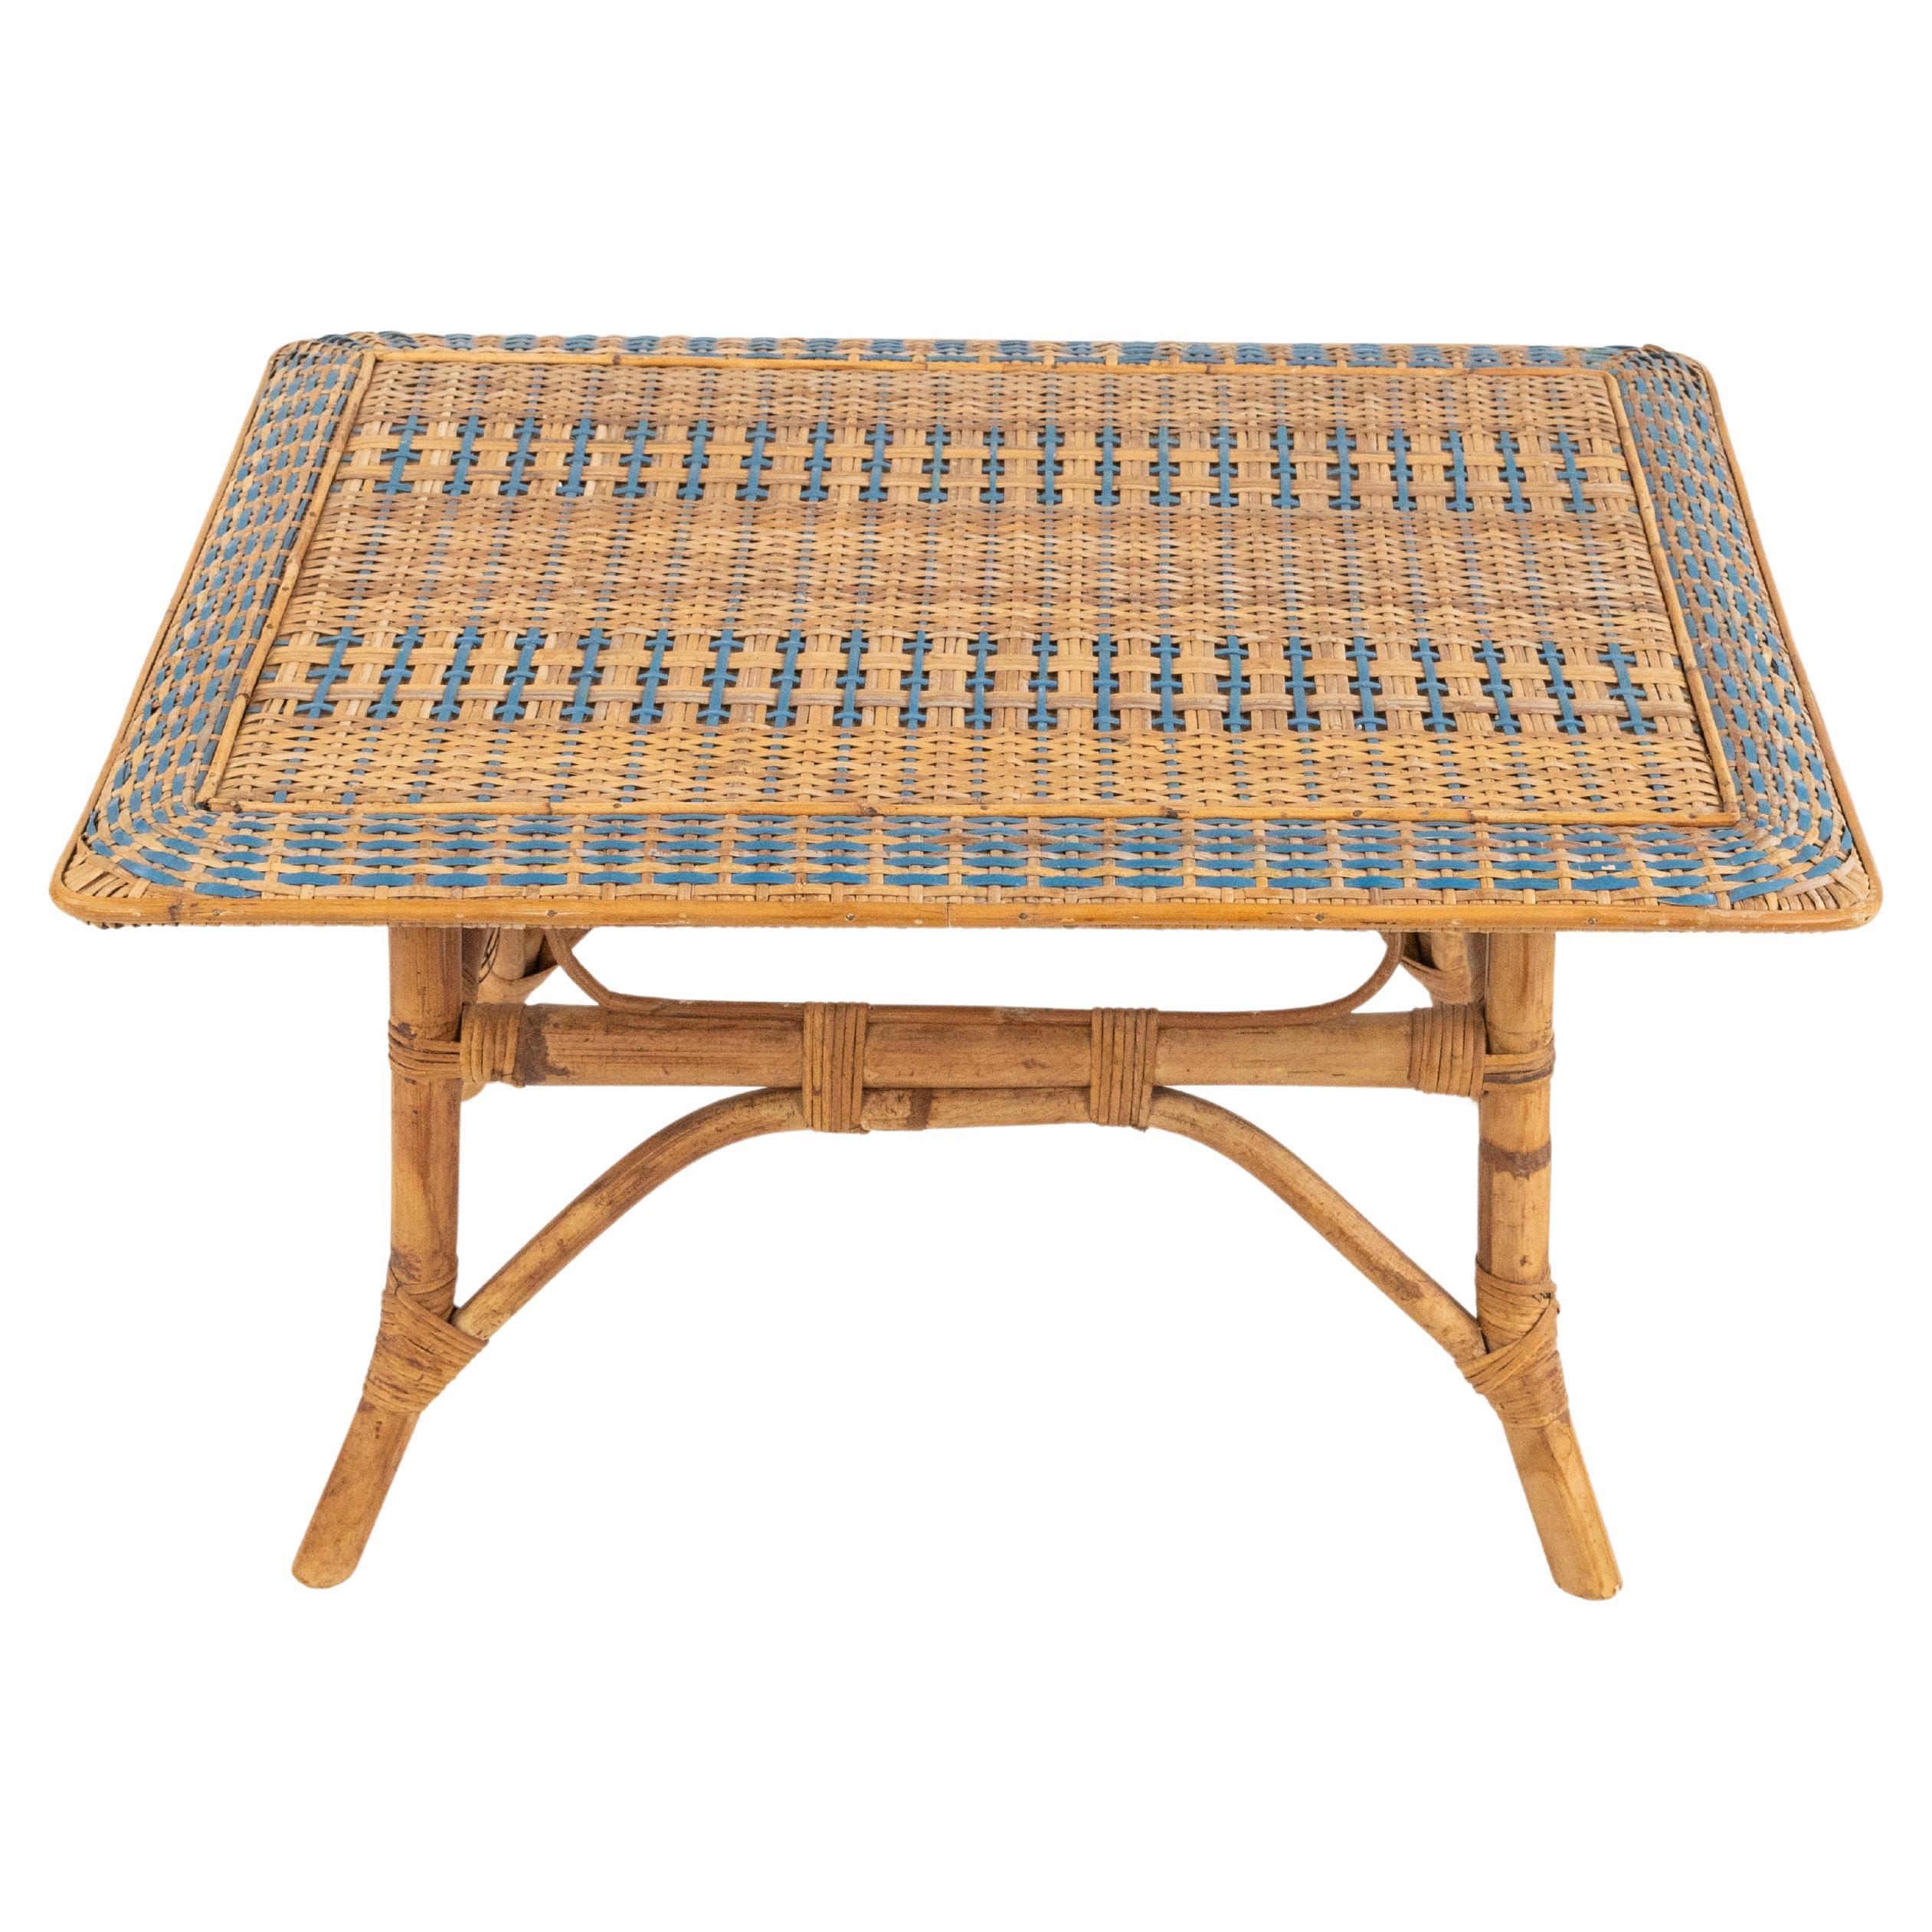 Midcentury Rectangular Coffee Table in Bamboo and Rattan, Italy 1960s